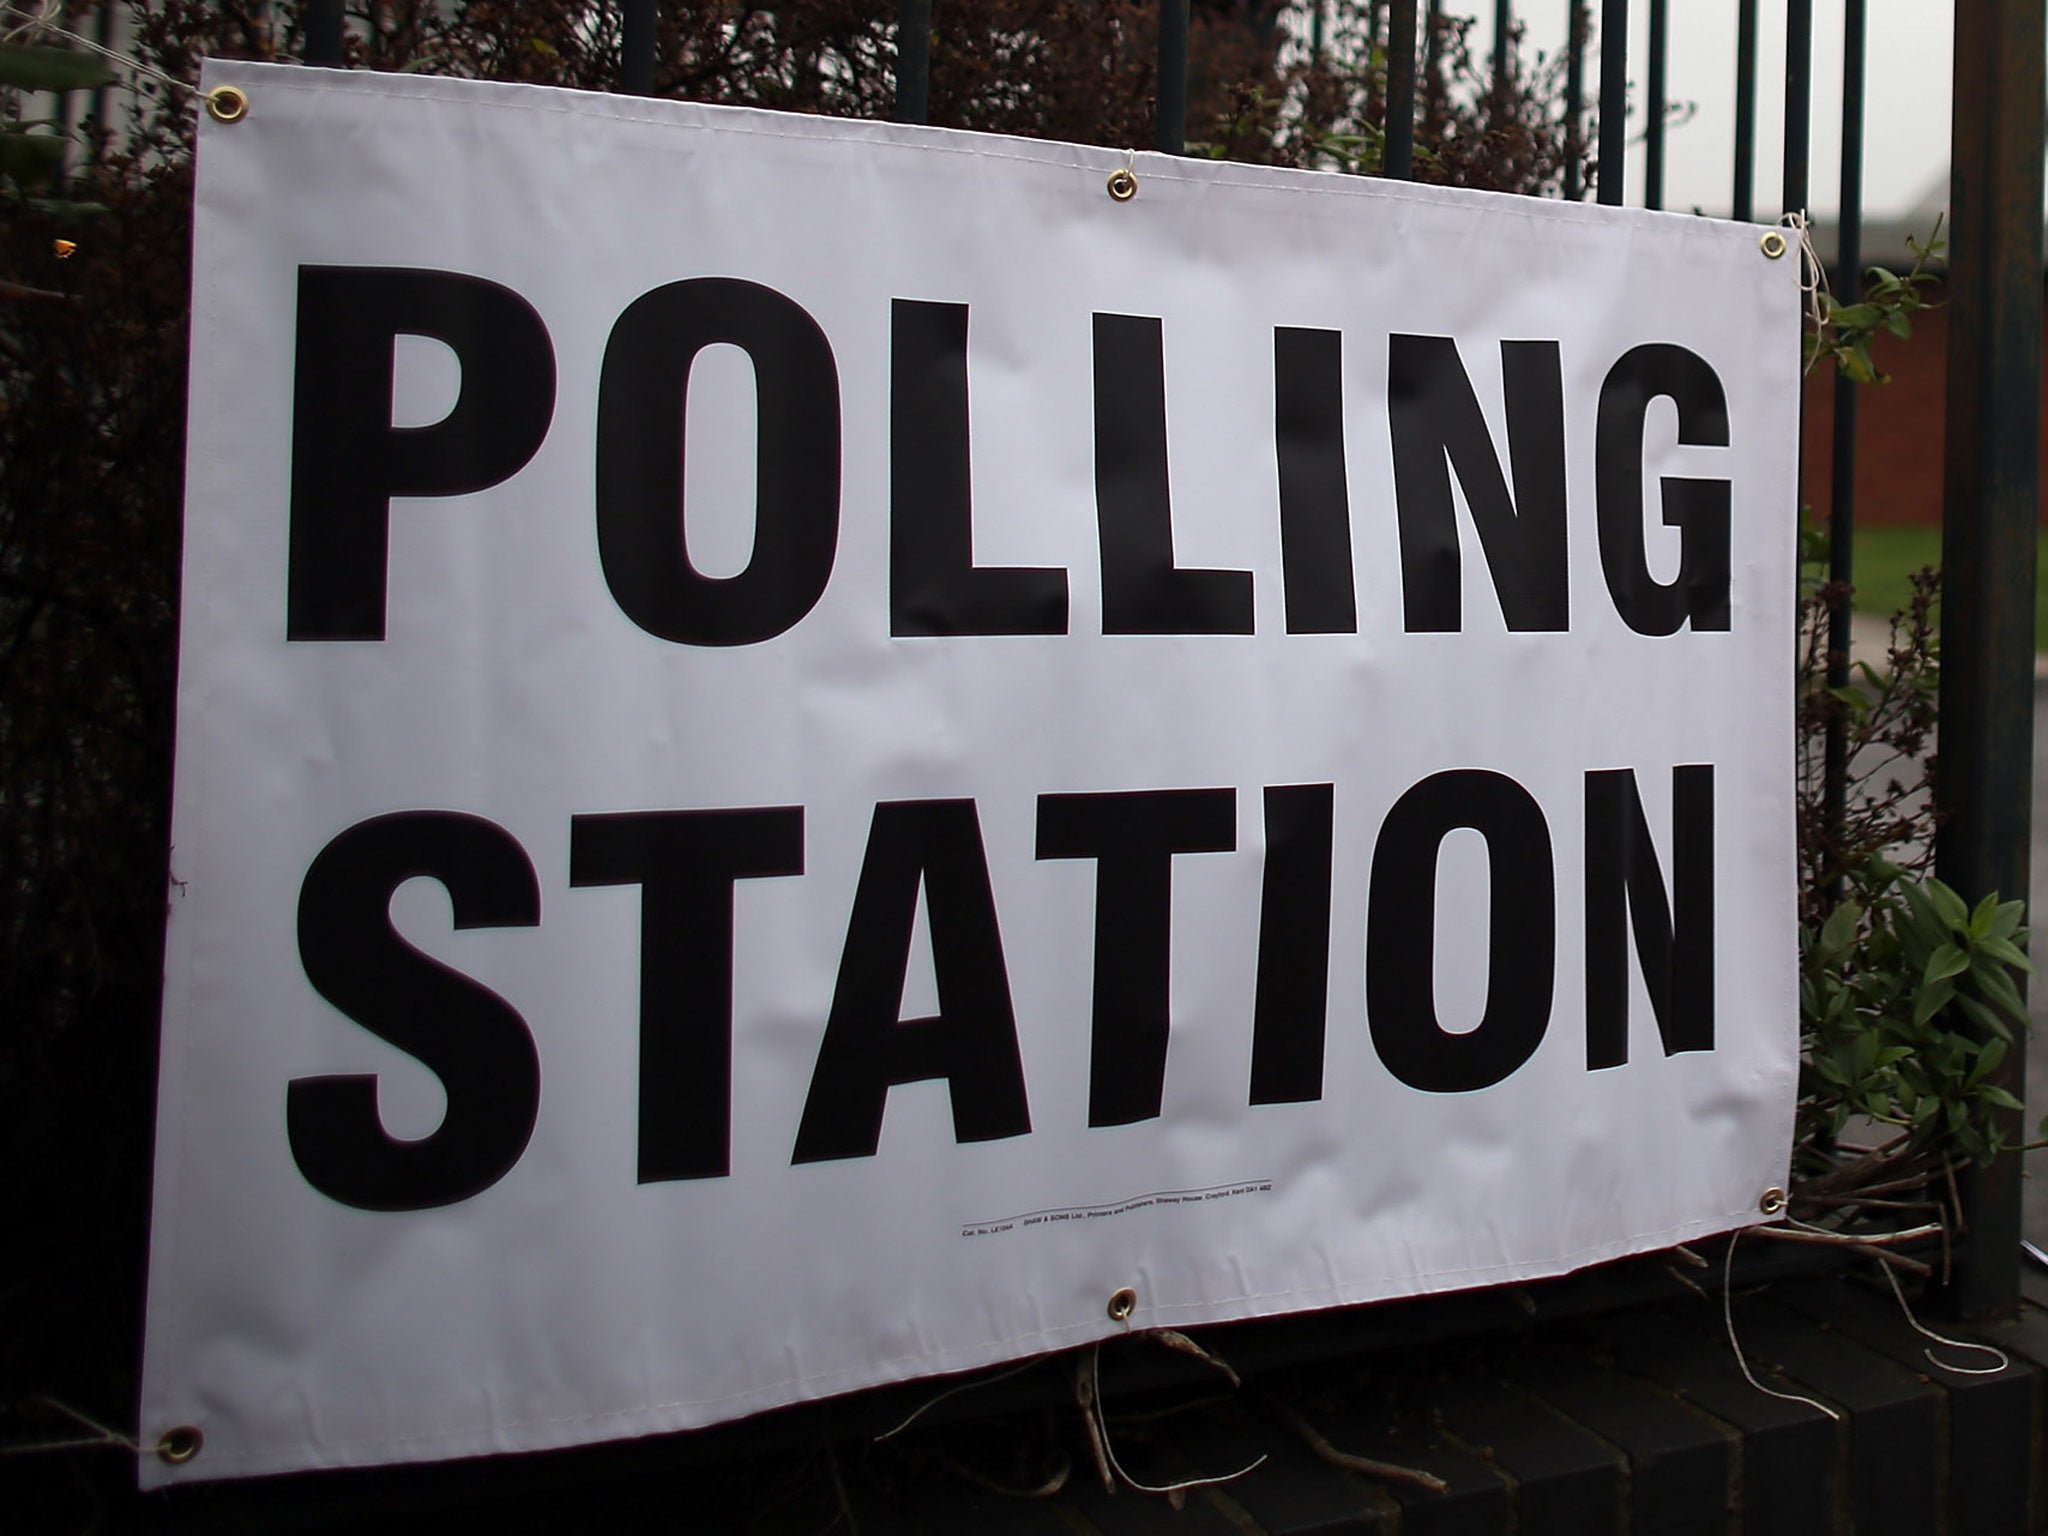 Voting should be made compulsory for young people casting their ballots for the first time, a leading think-tank says